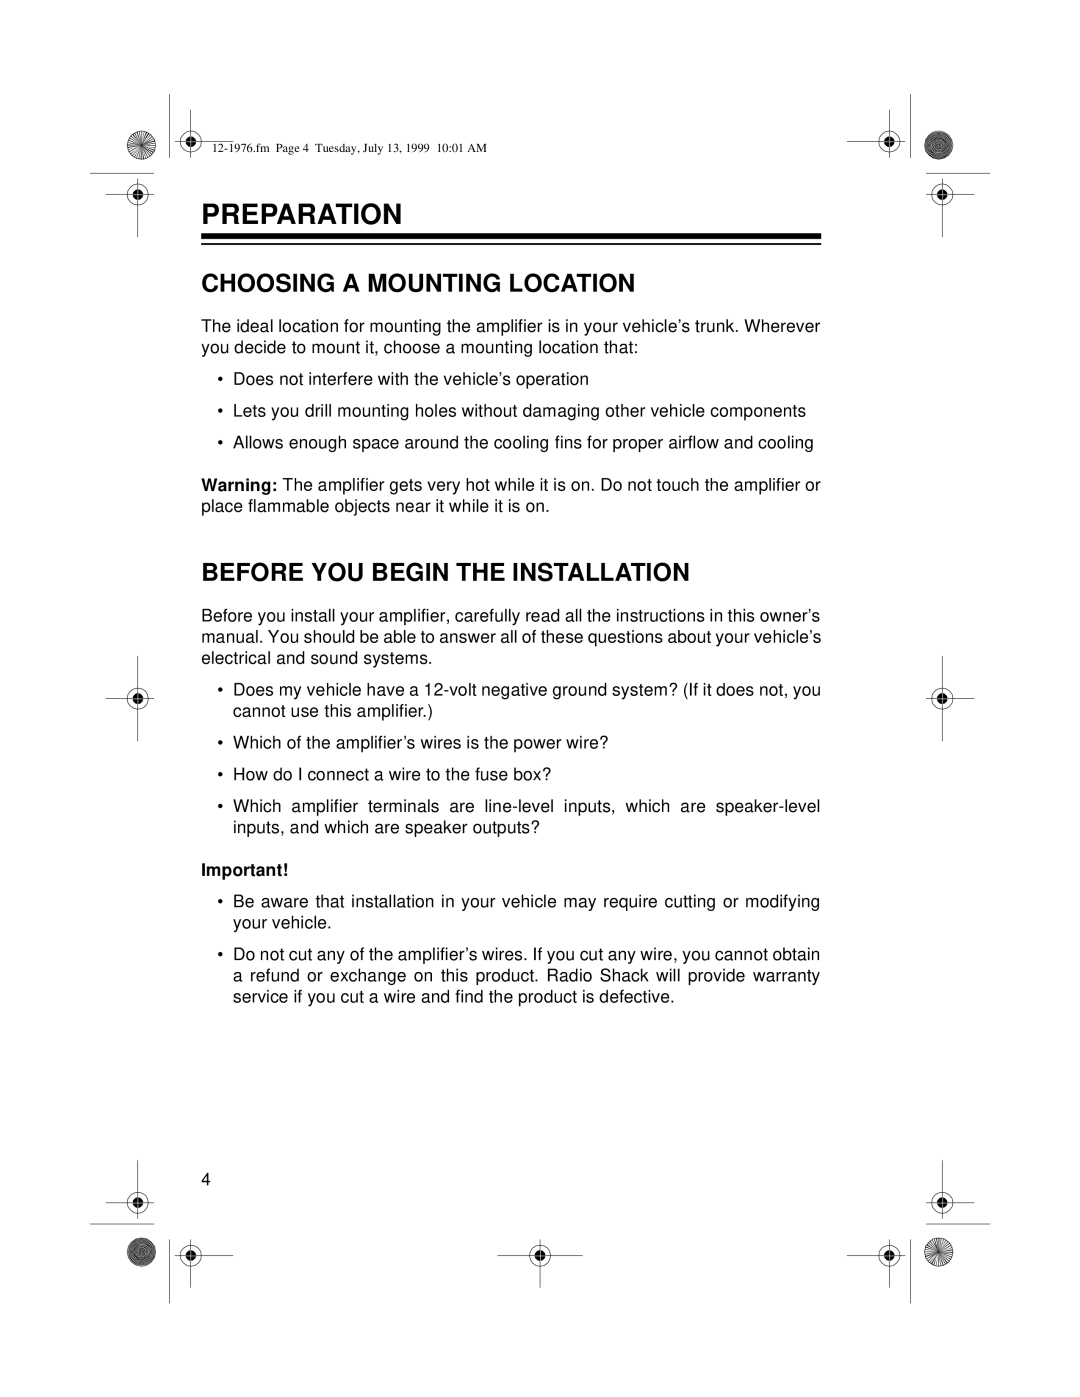 Radio Shack Trunk Mount owner manual Preparation, Choosing A Mounting Location, Before You Begin The Installation 